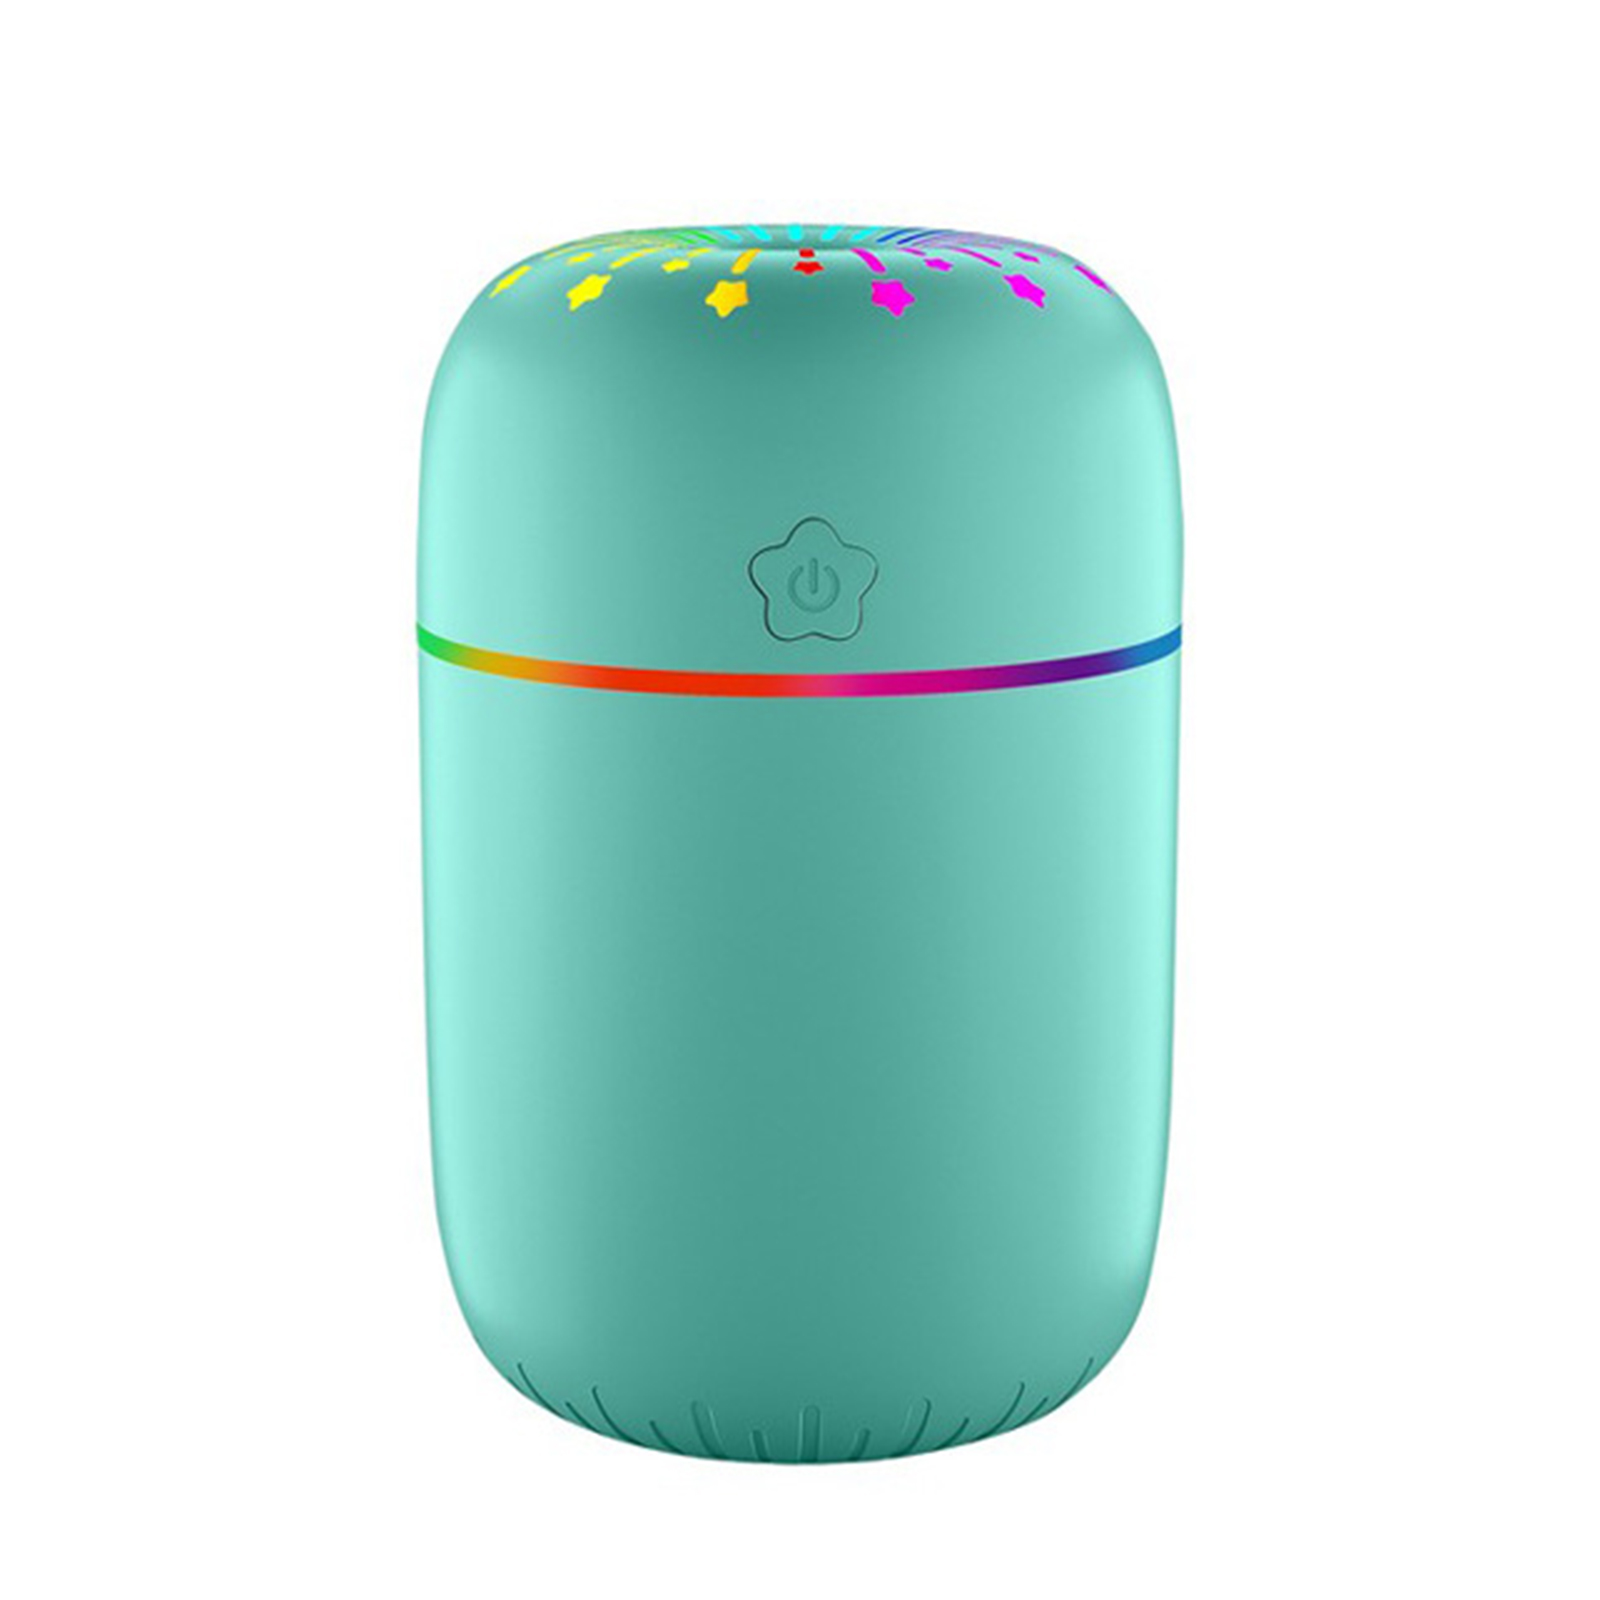 Colorful Mini Humidifier With 300ml Water Tank Usb Aroma Essential Oil Diffuser Colorful Night Light green